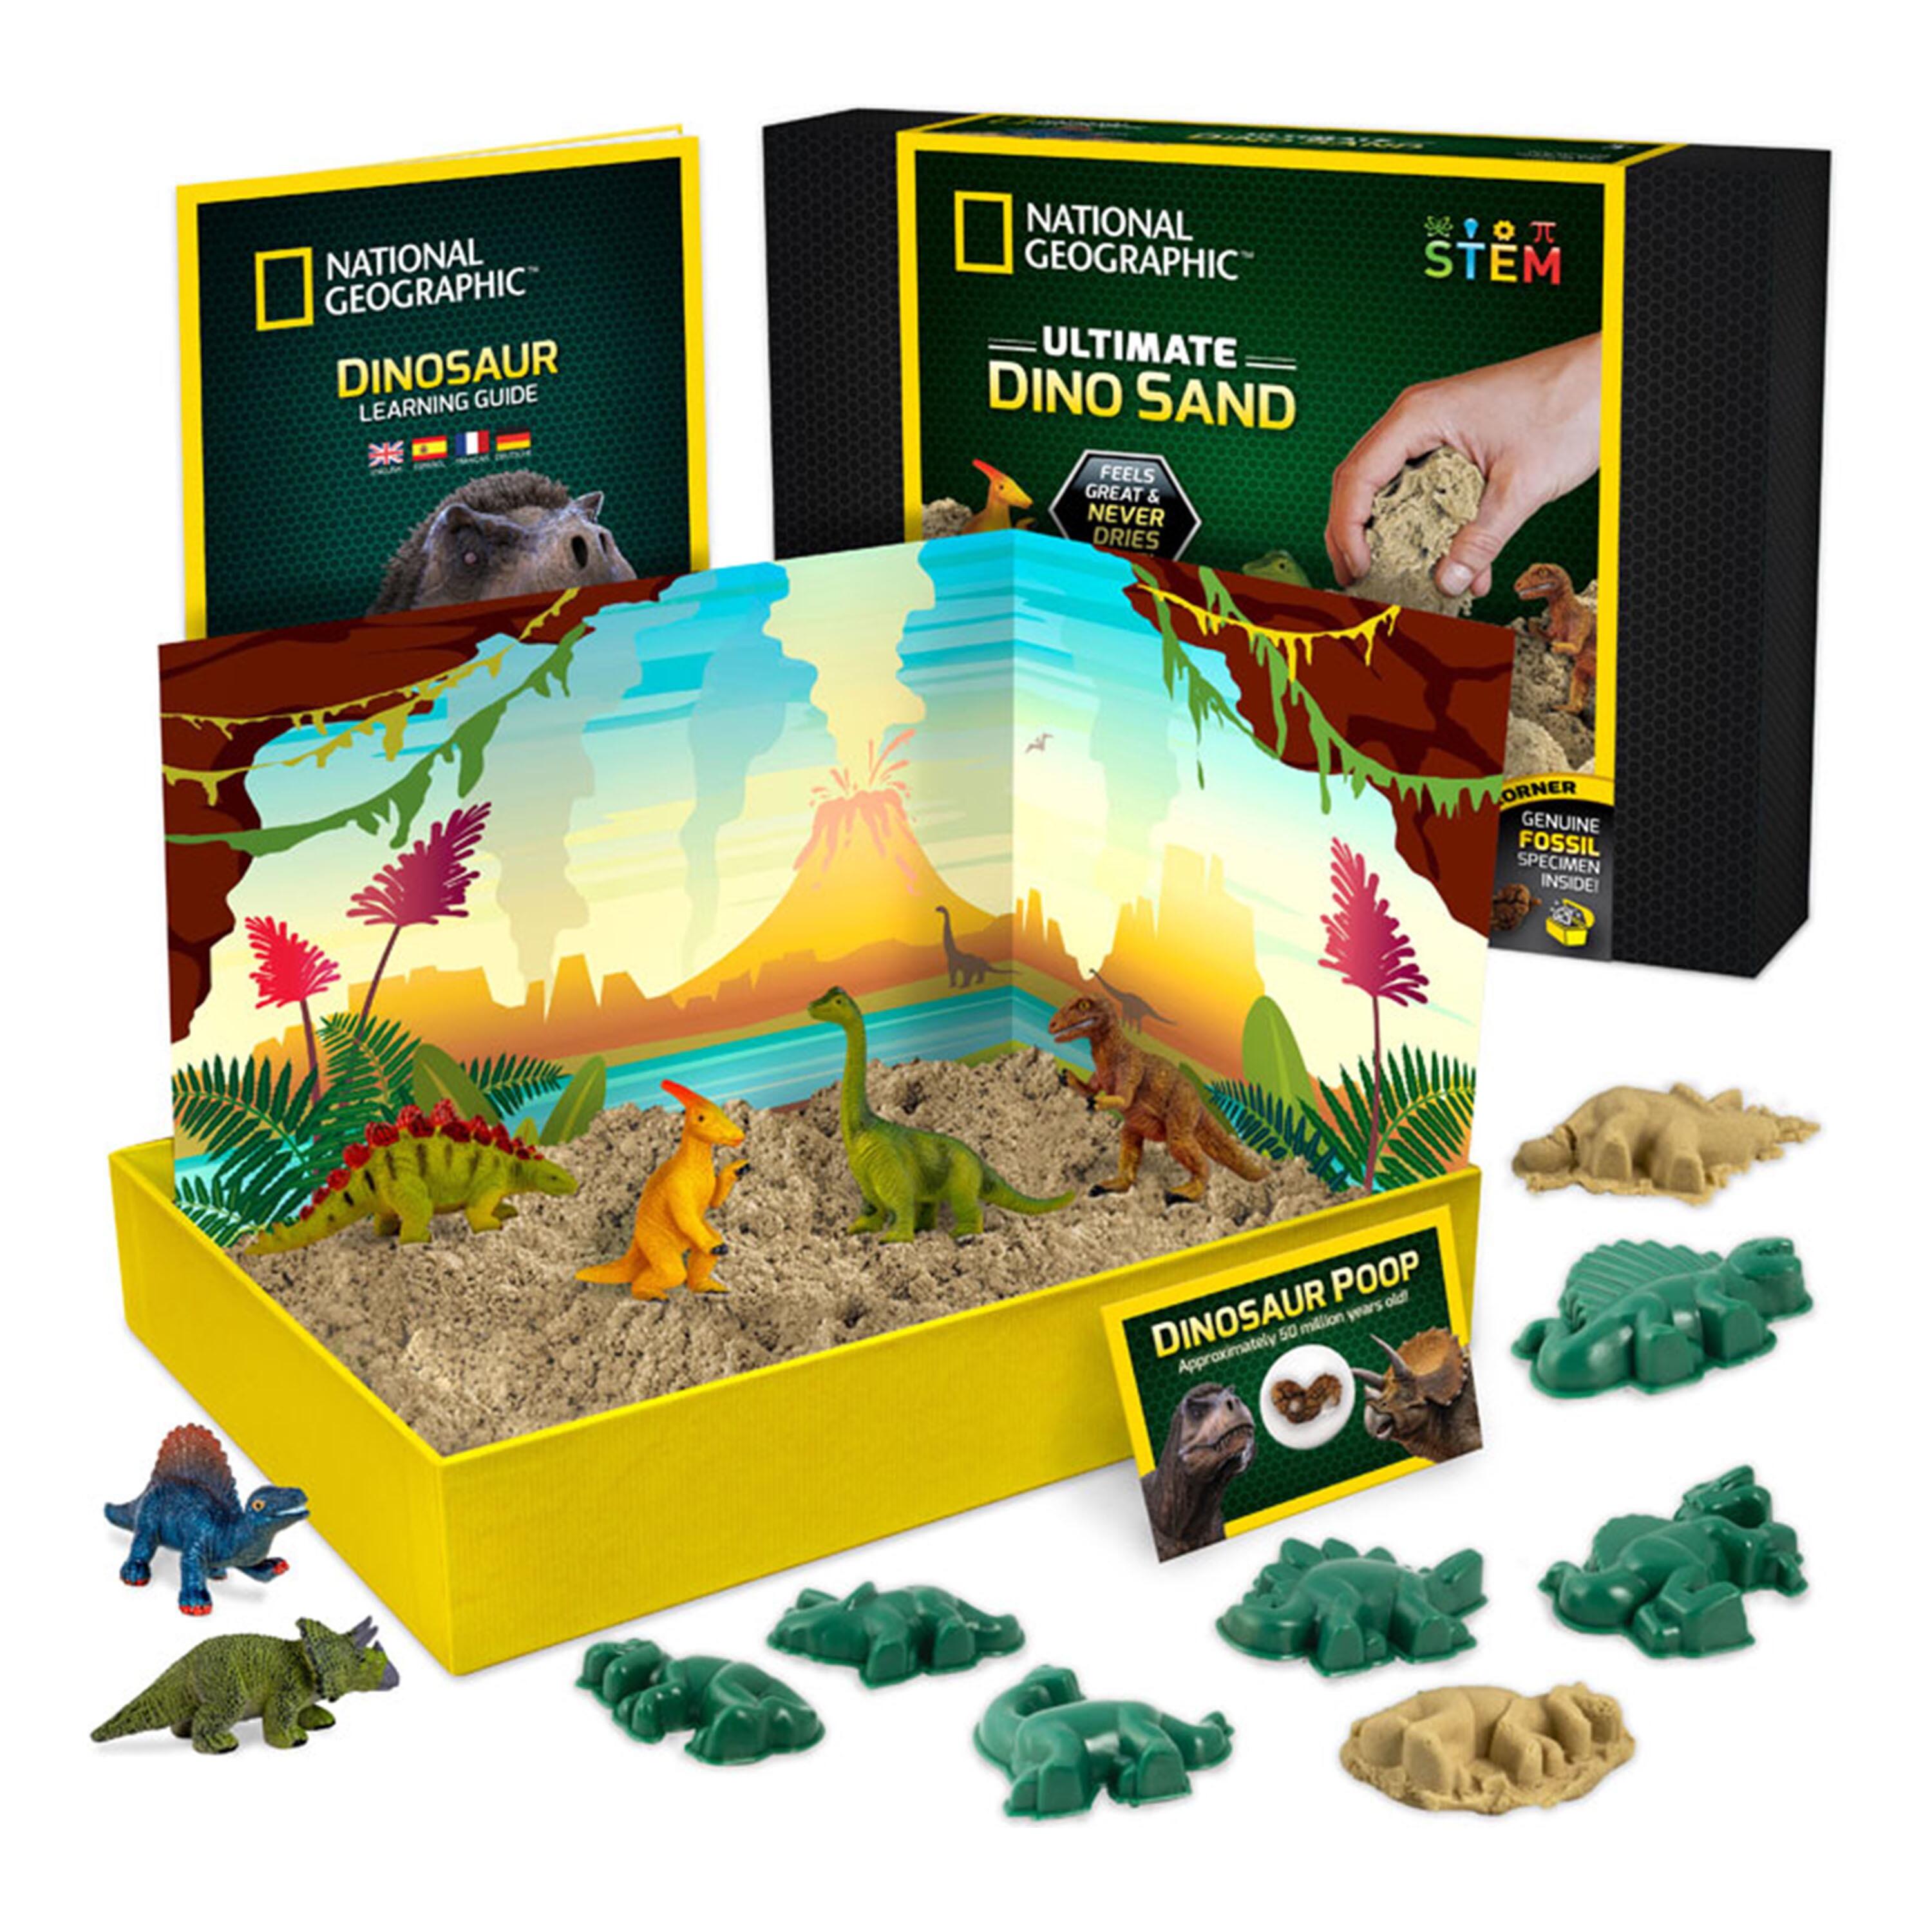 National Geographic Ultimate Dino Sand